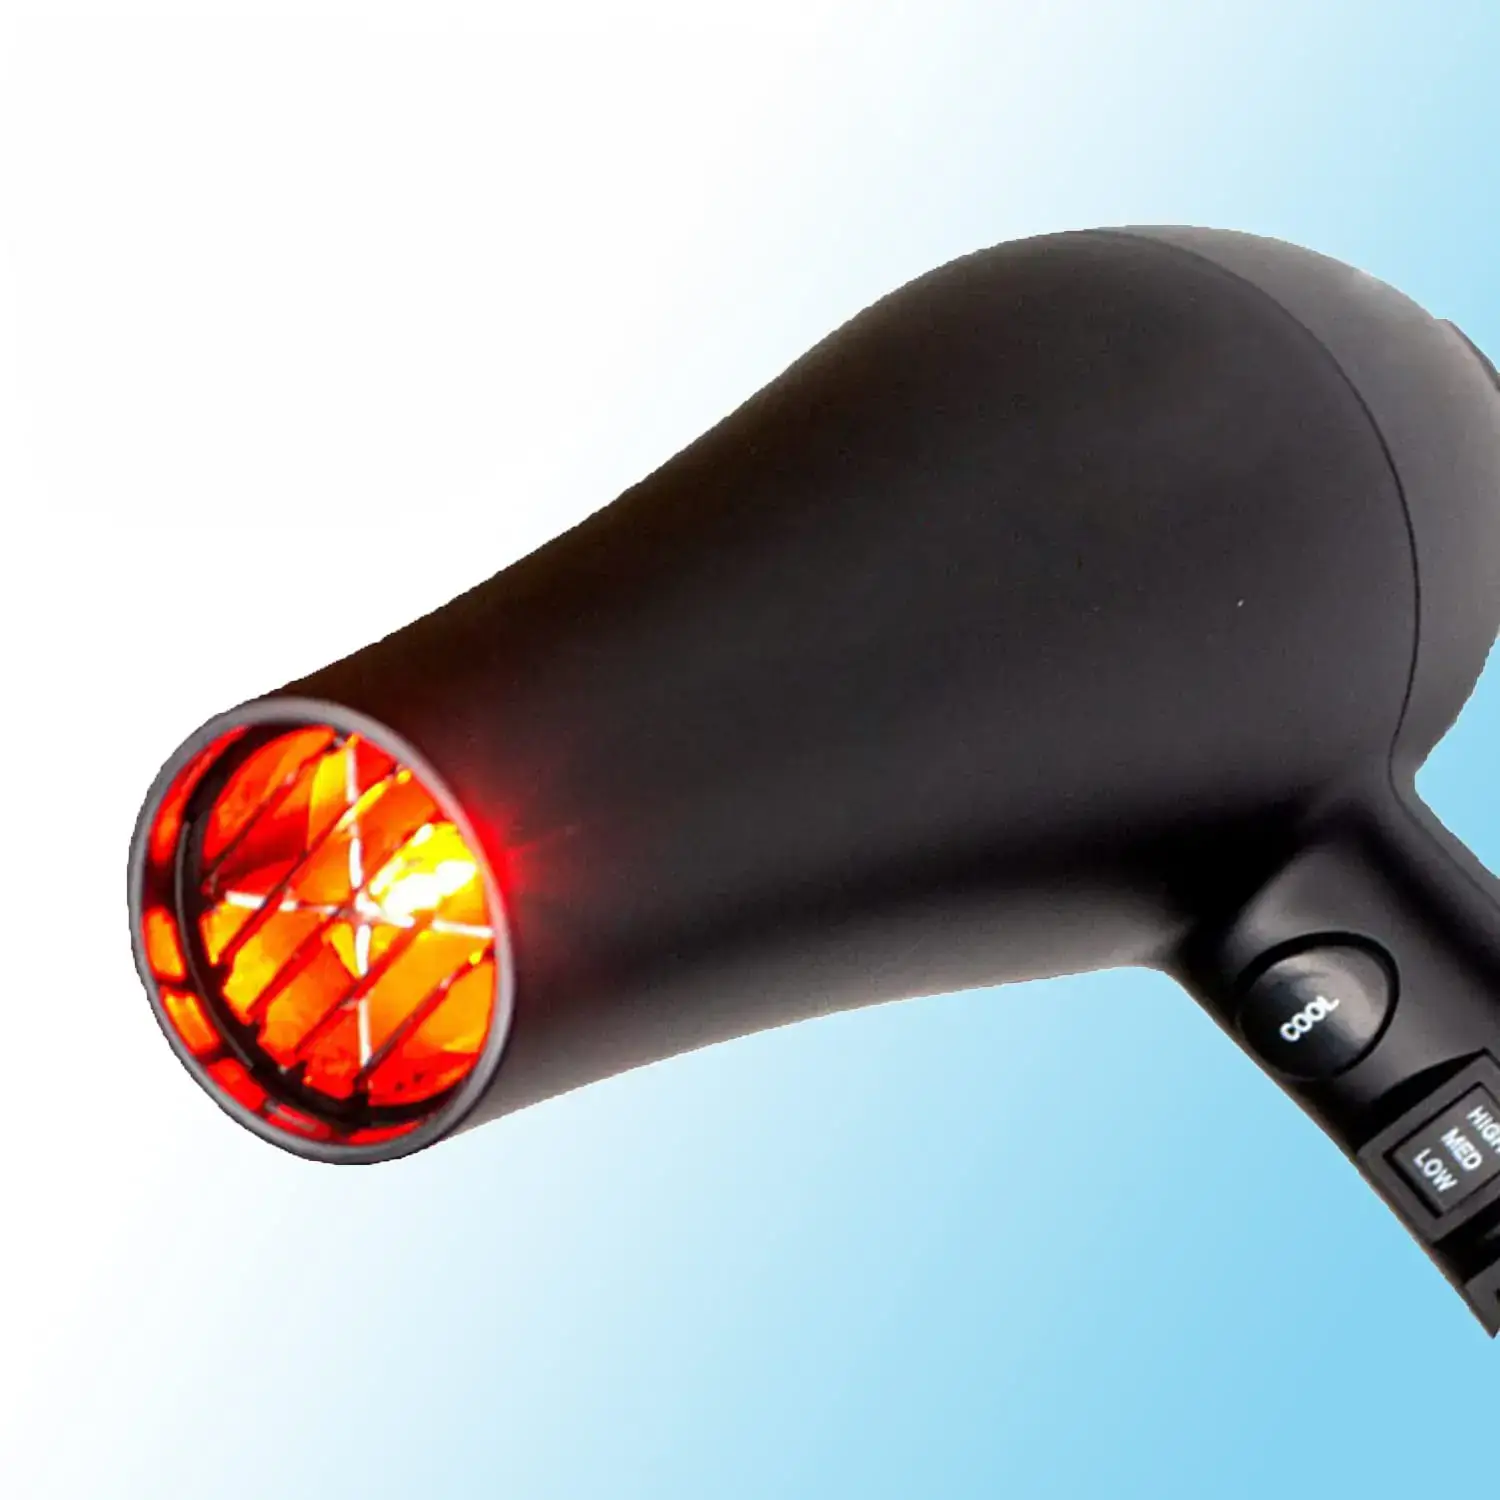 Infrared hair dryer with visible red heating elements.